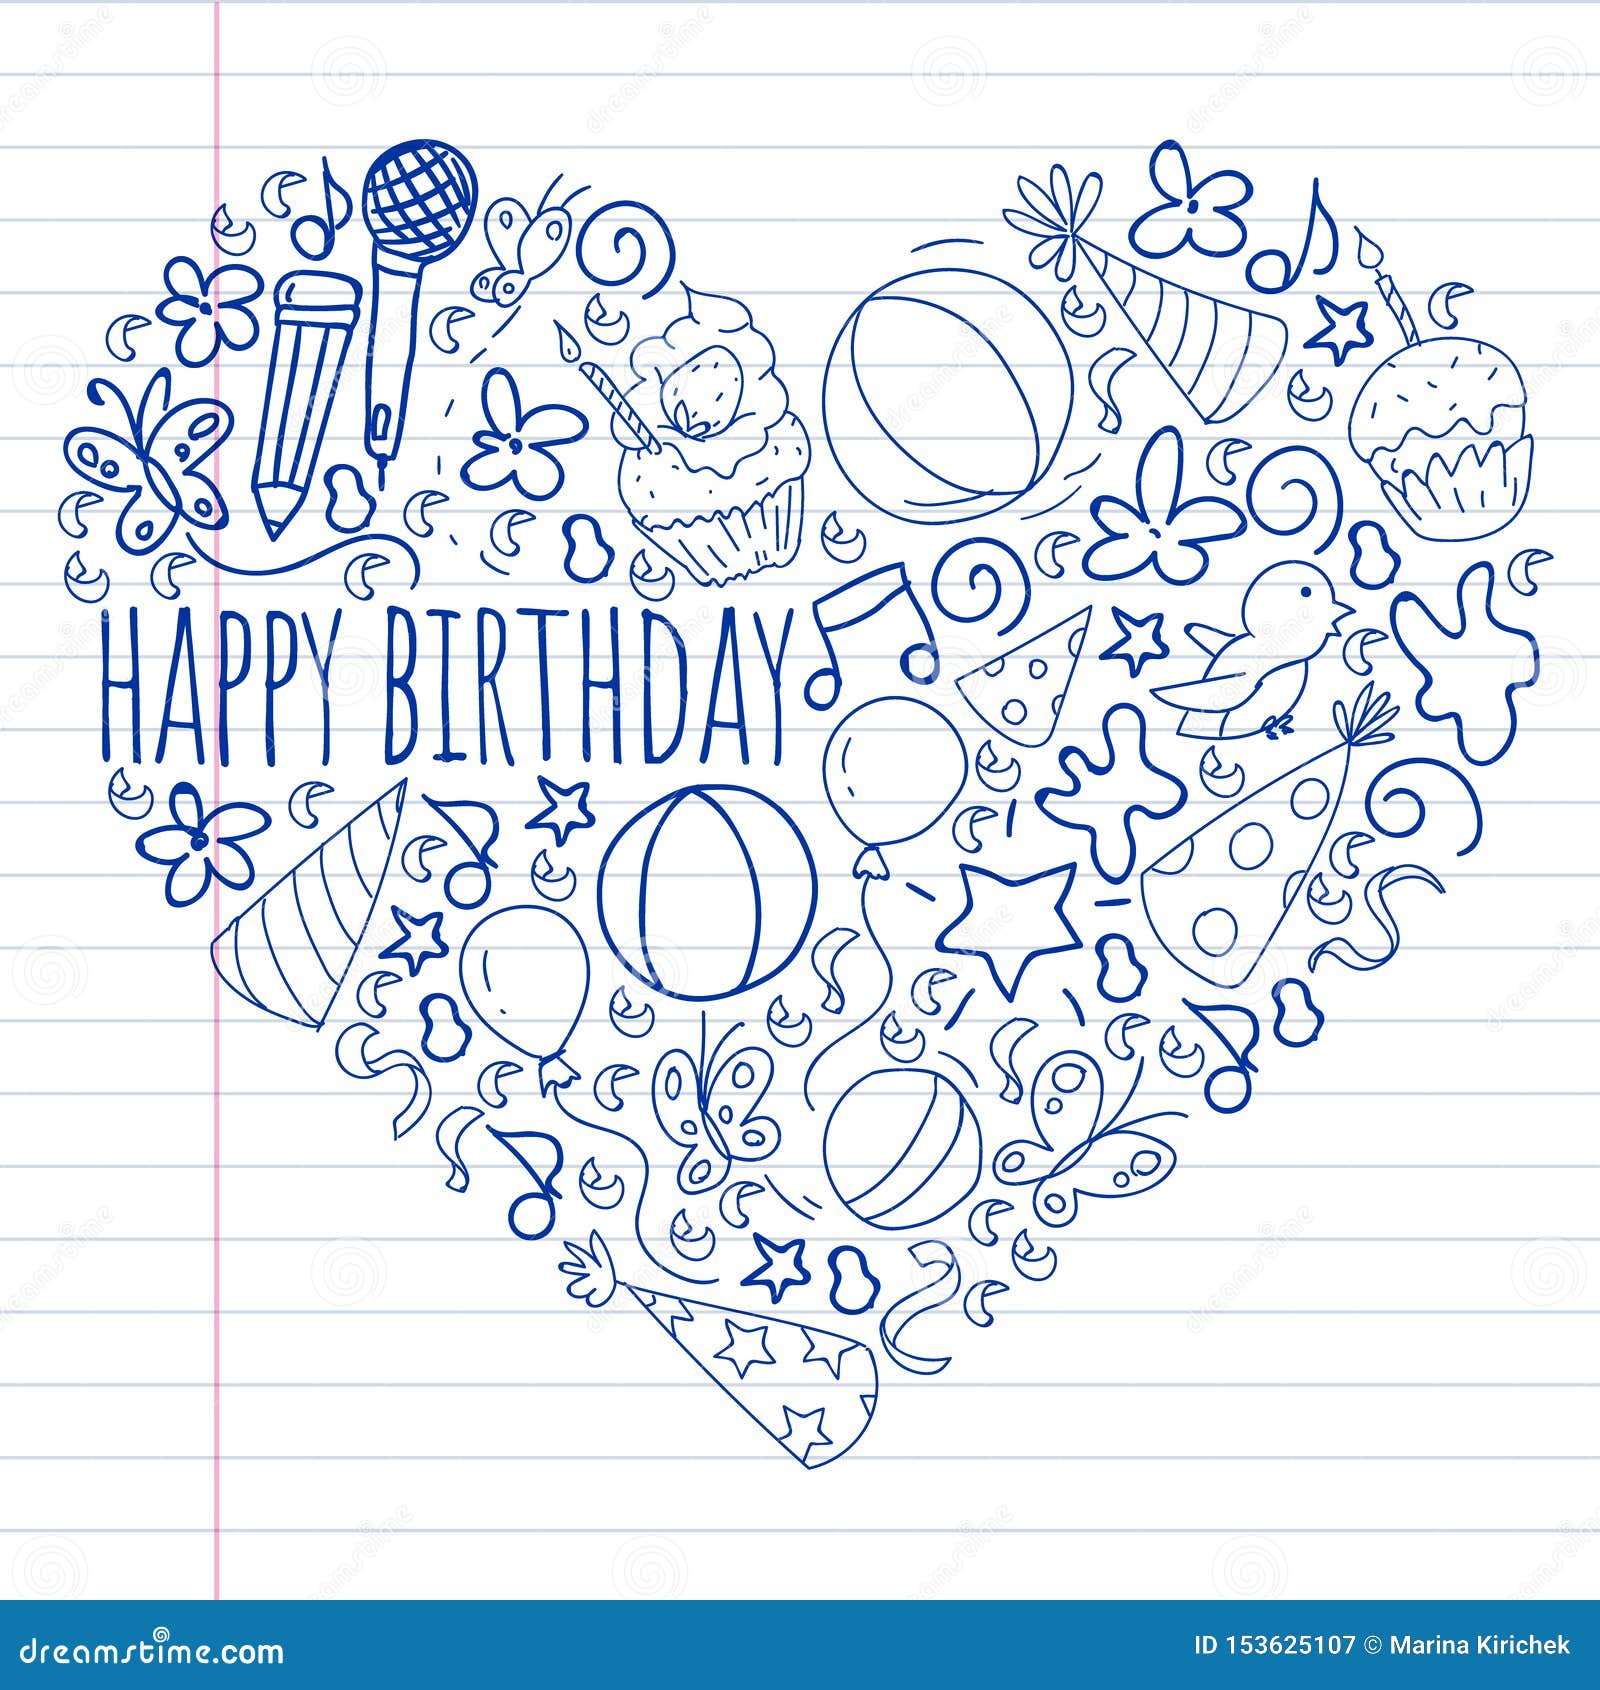 Happy Birthday Coloring Pages For Mom | Free Dinosaur Pictures To Color